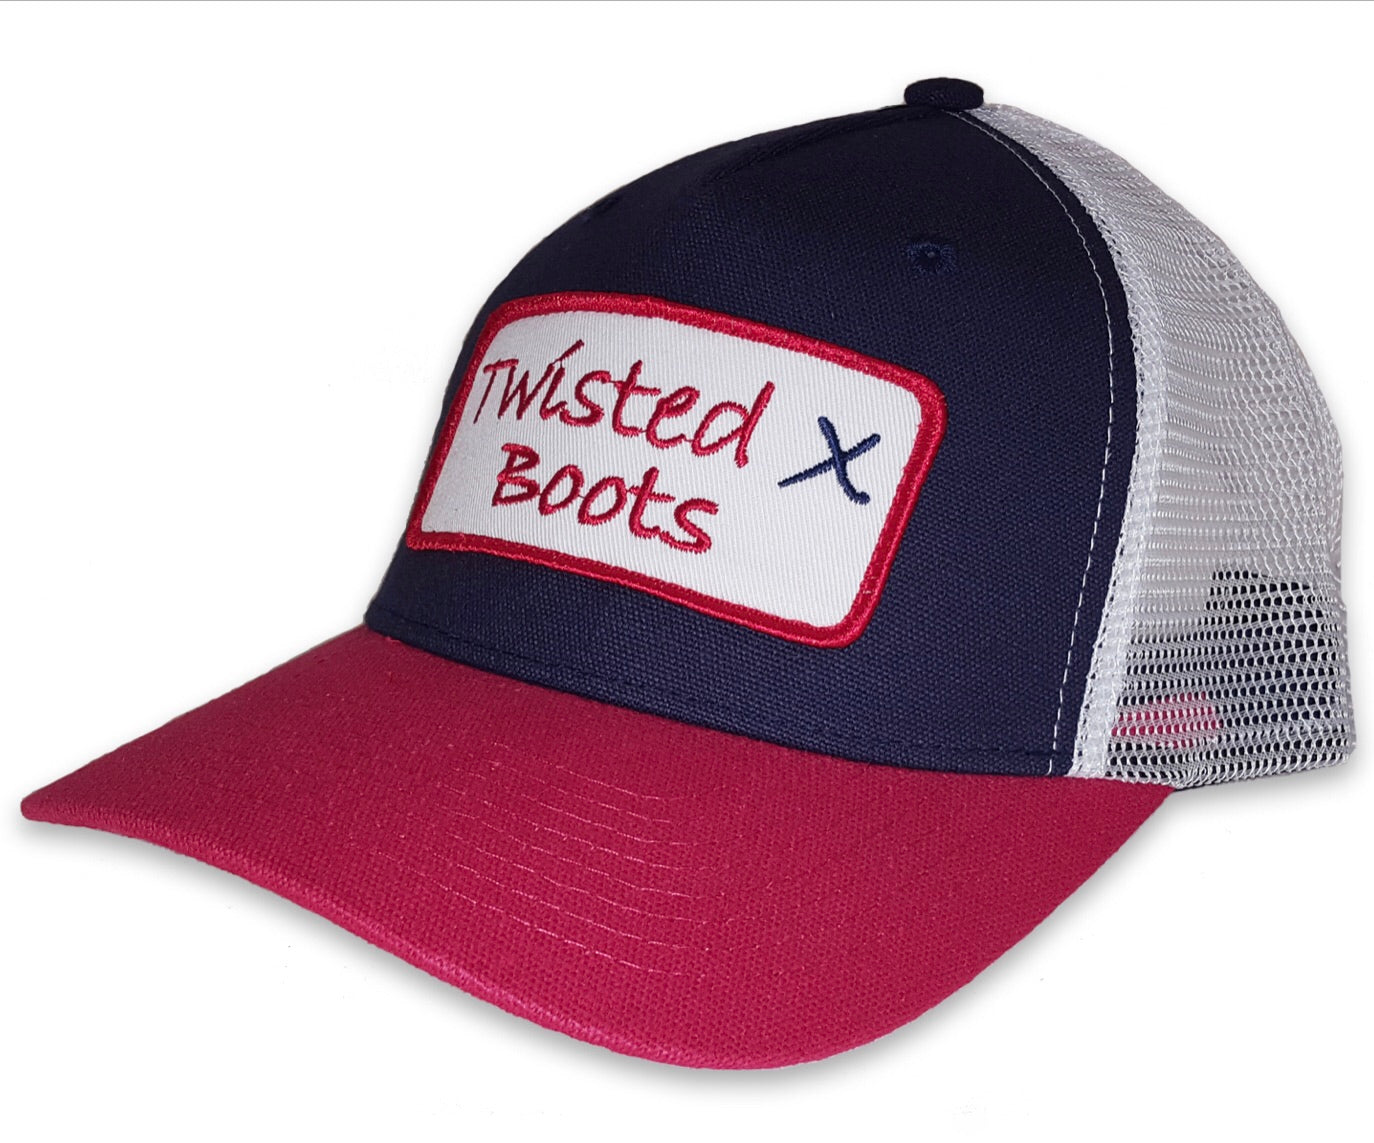 Ball Caps Men’s Twisted X